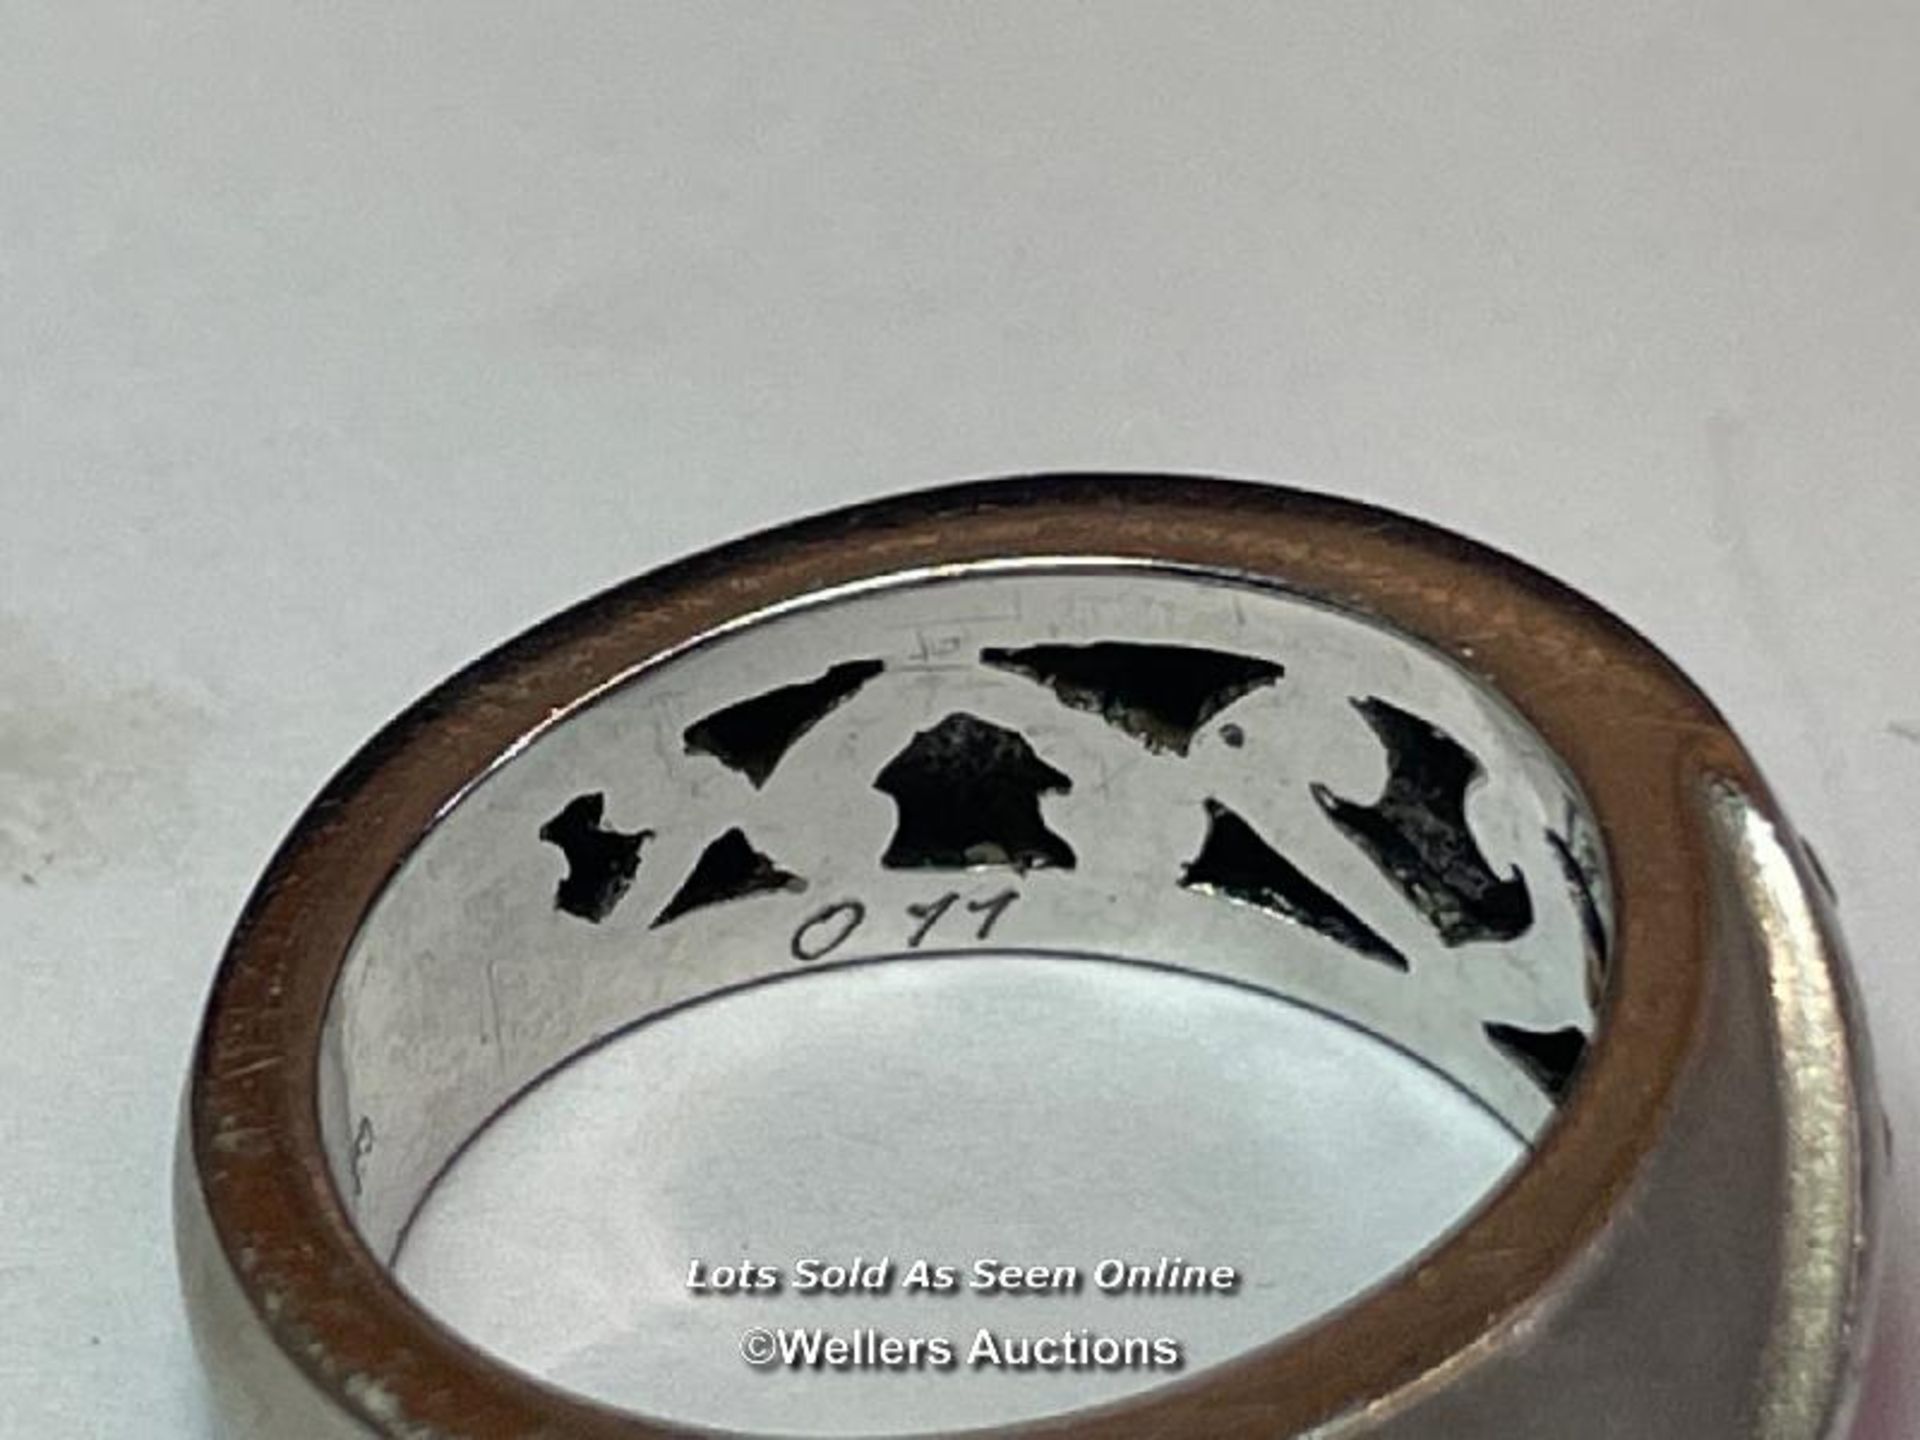 WHITE GOLD RING SET WITH NINE DIAMOND ACCENTS, PART POLISHED PART MATT FINISHED, STAMPED 750, RING - Image 3 of 7